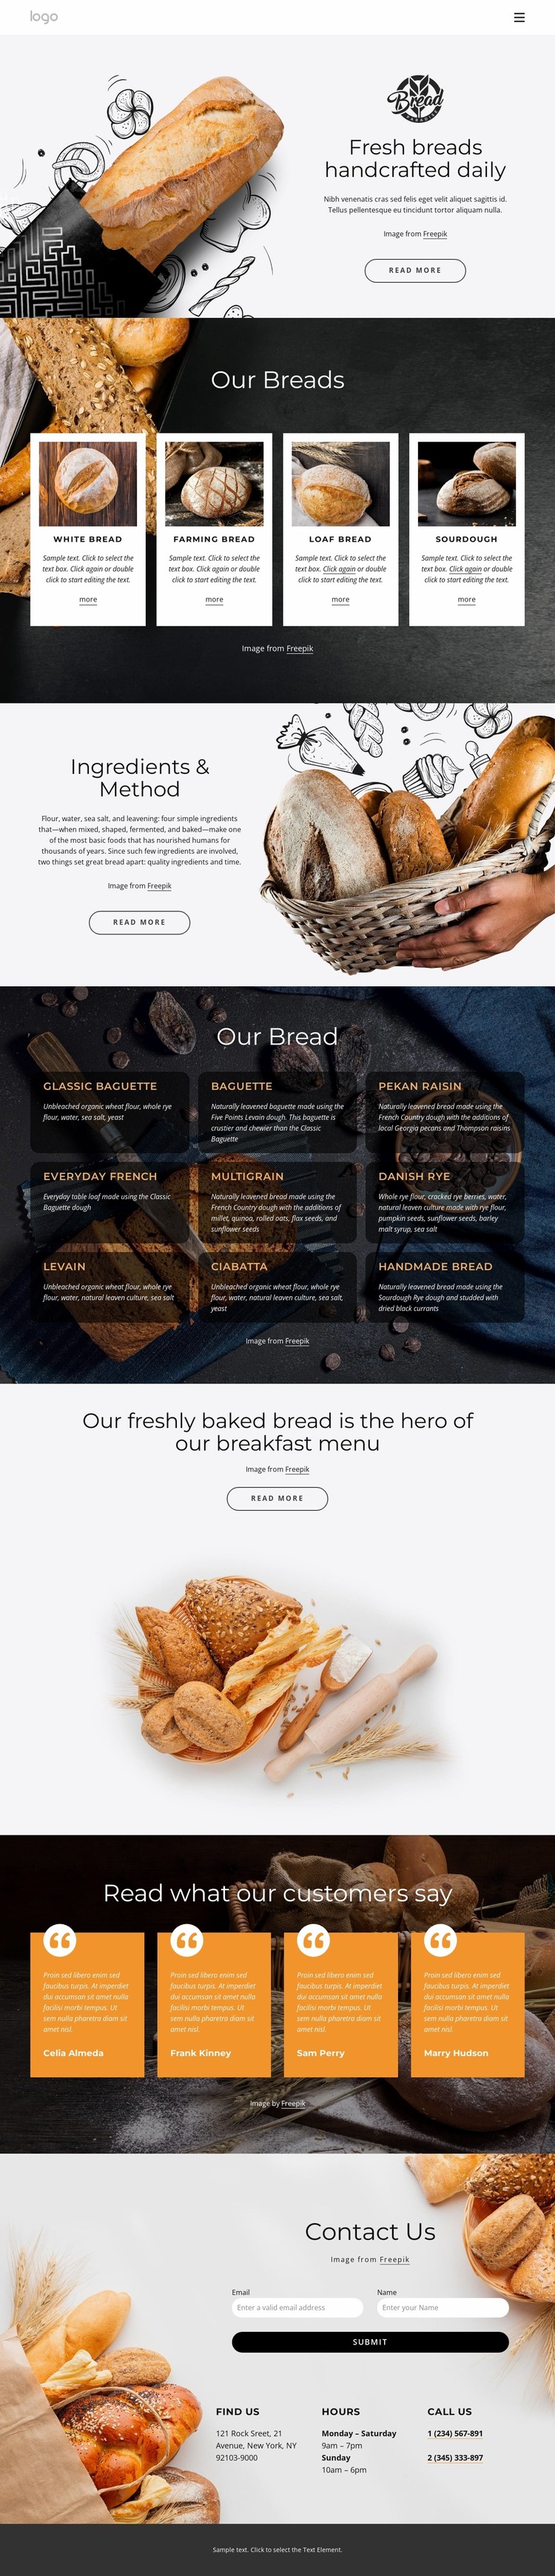 Fresh bread handcrafted every day Website Mockup